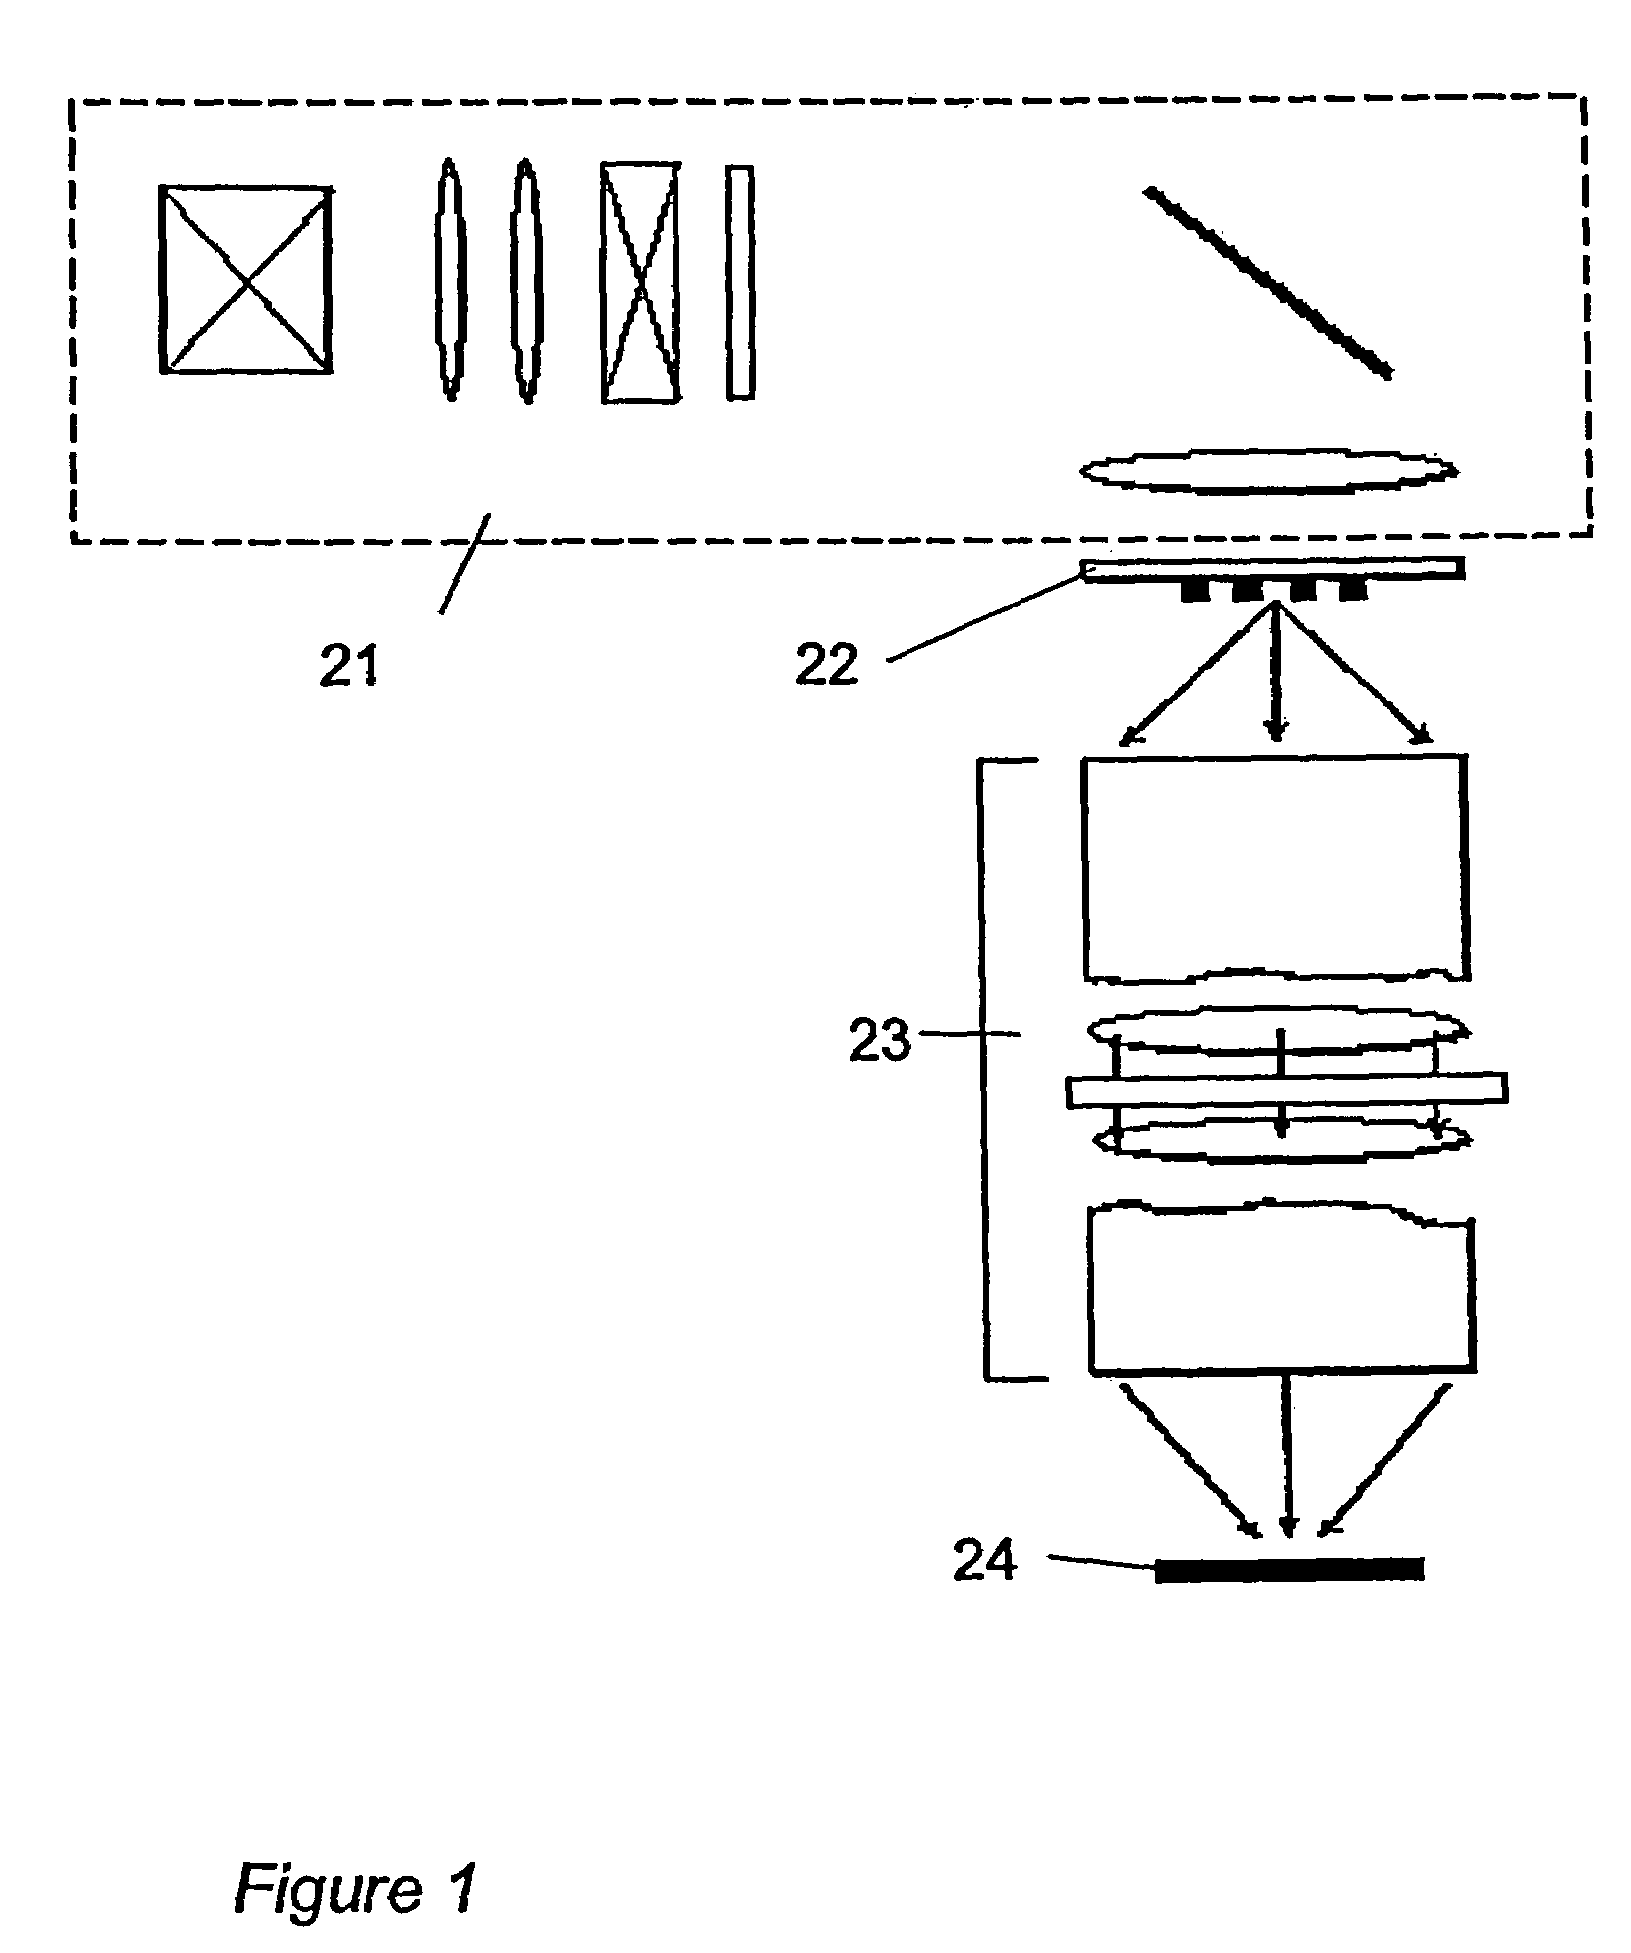 Method for aberration detection and measurement